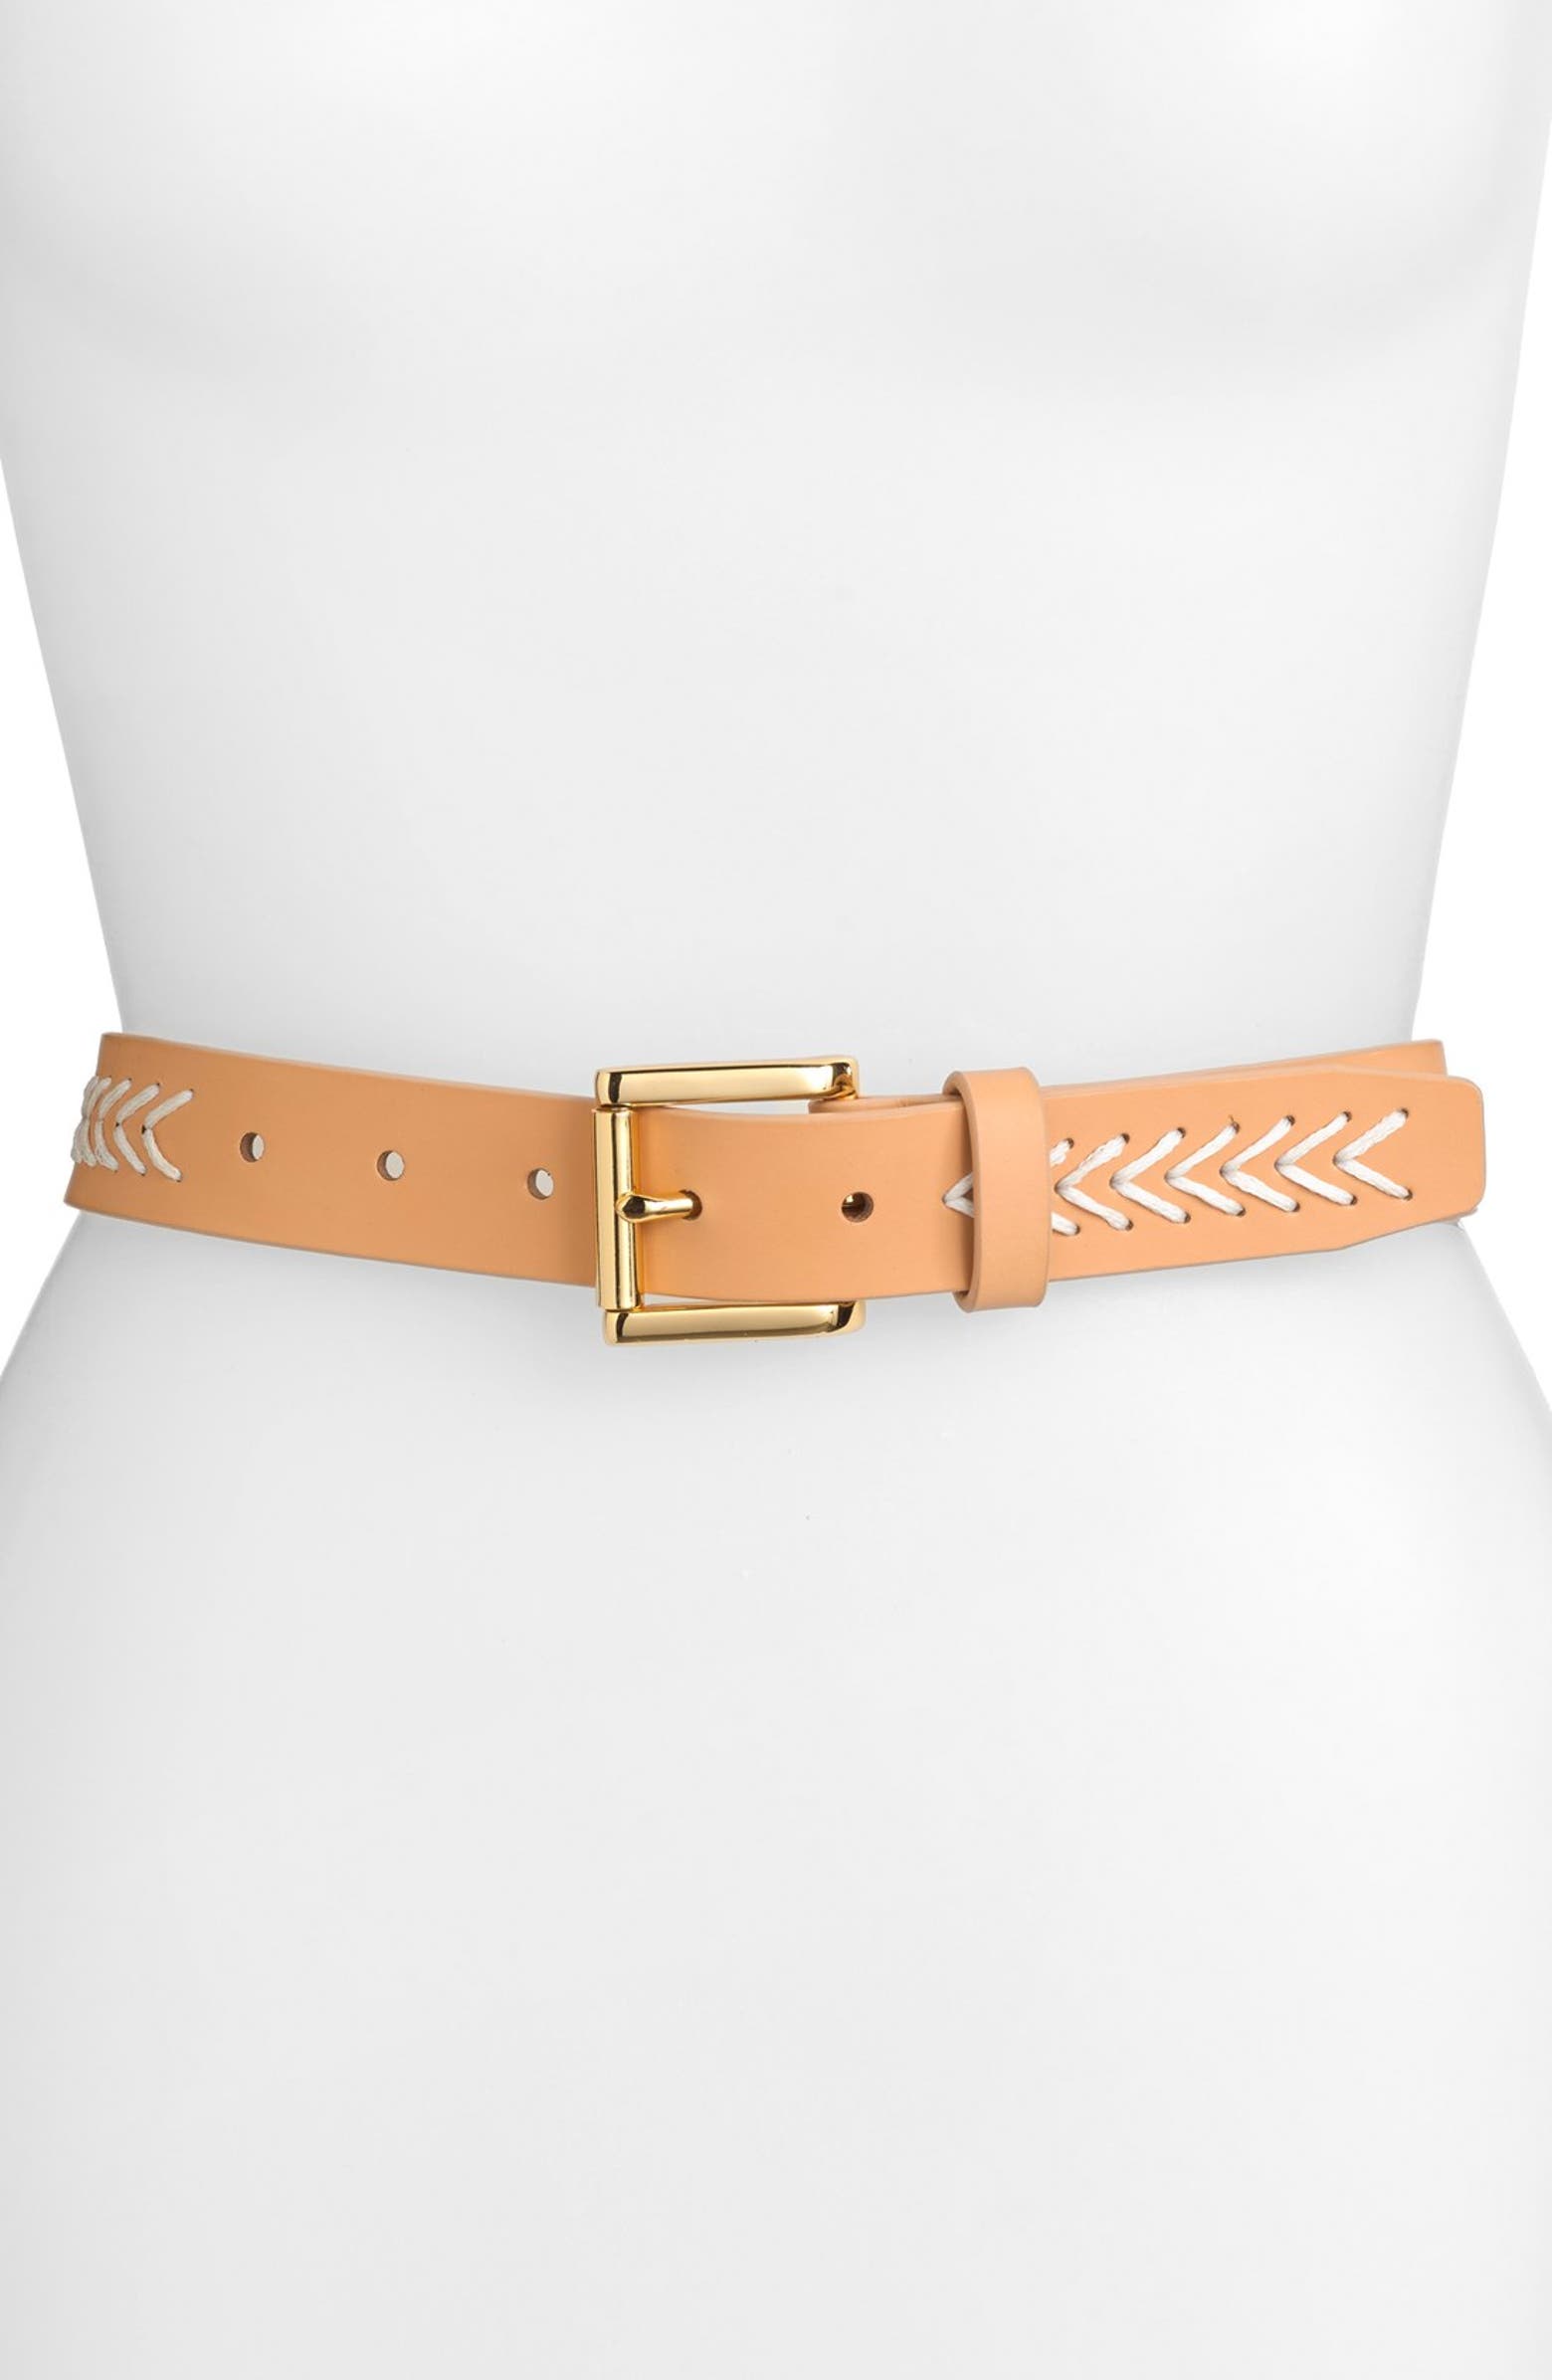 Vince Camuto Waxed Cord & Leather Belt | Nordstrom